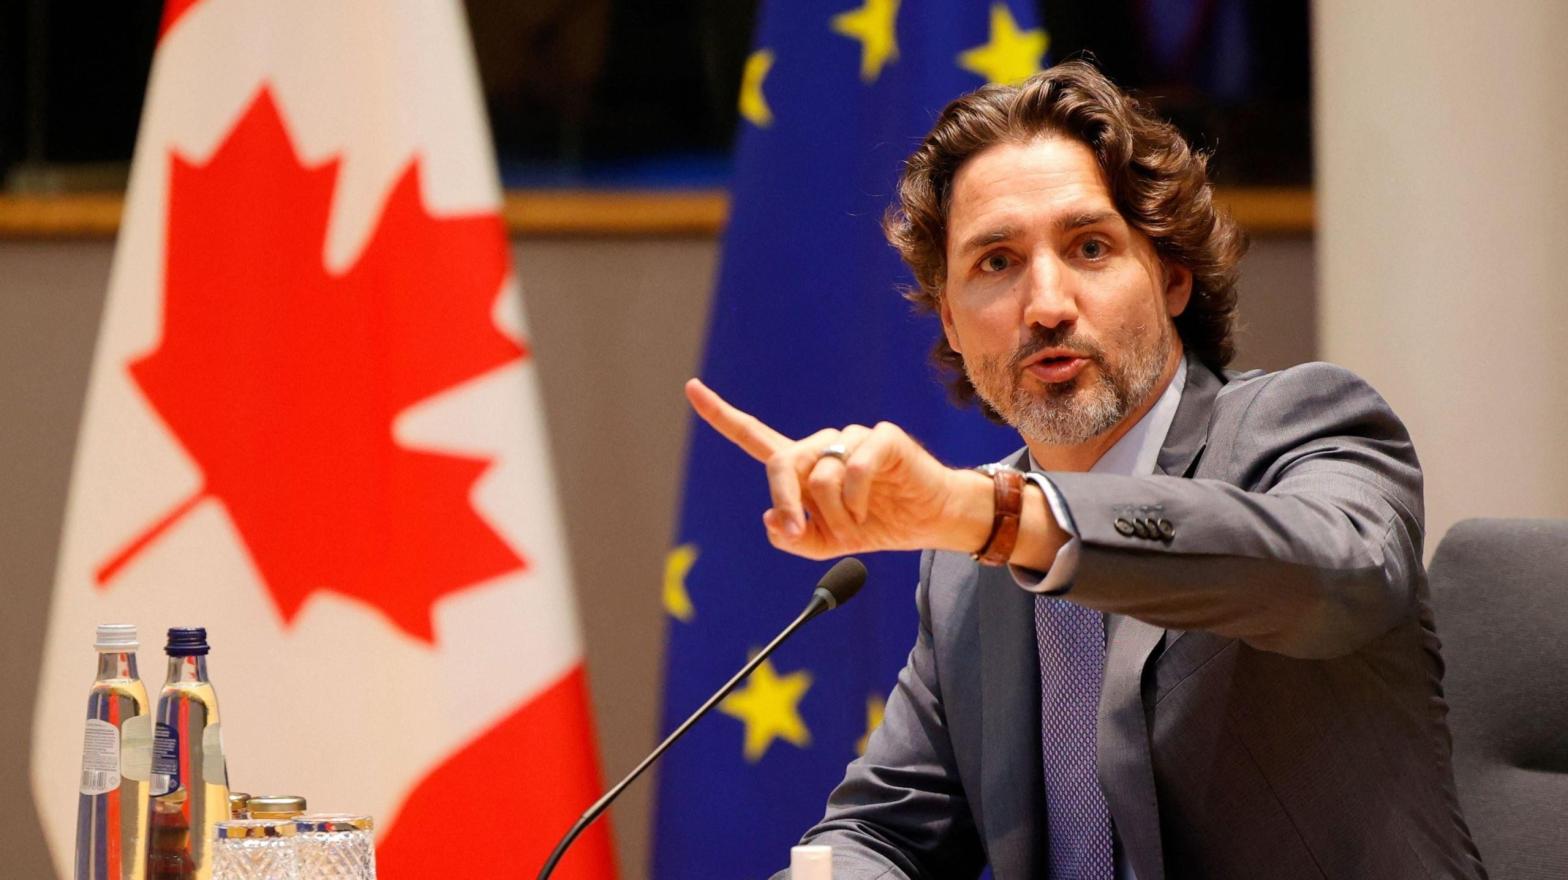 File photo of Canadian Prime Minister Justin Trudeau. (Photo: Olivier Matthys/AFP, Getty Images)